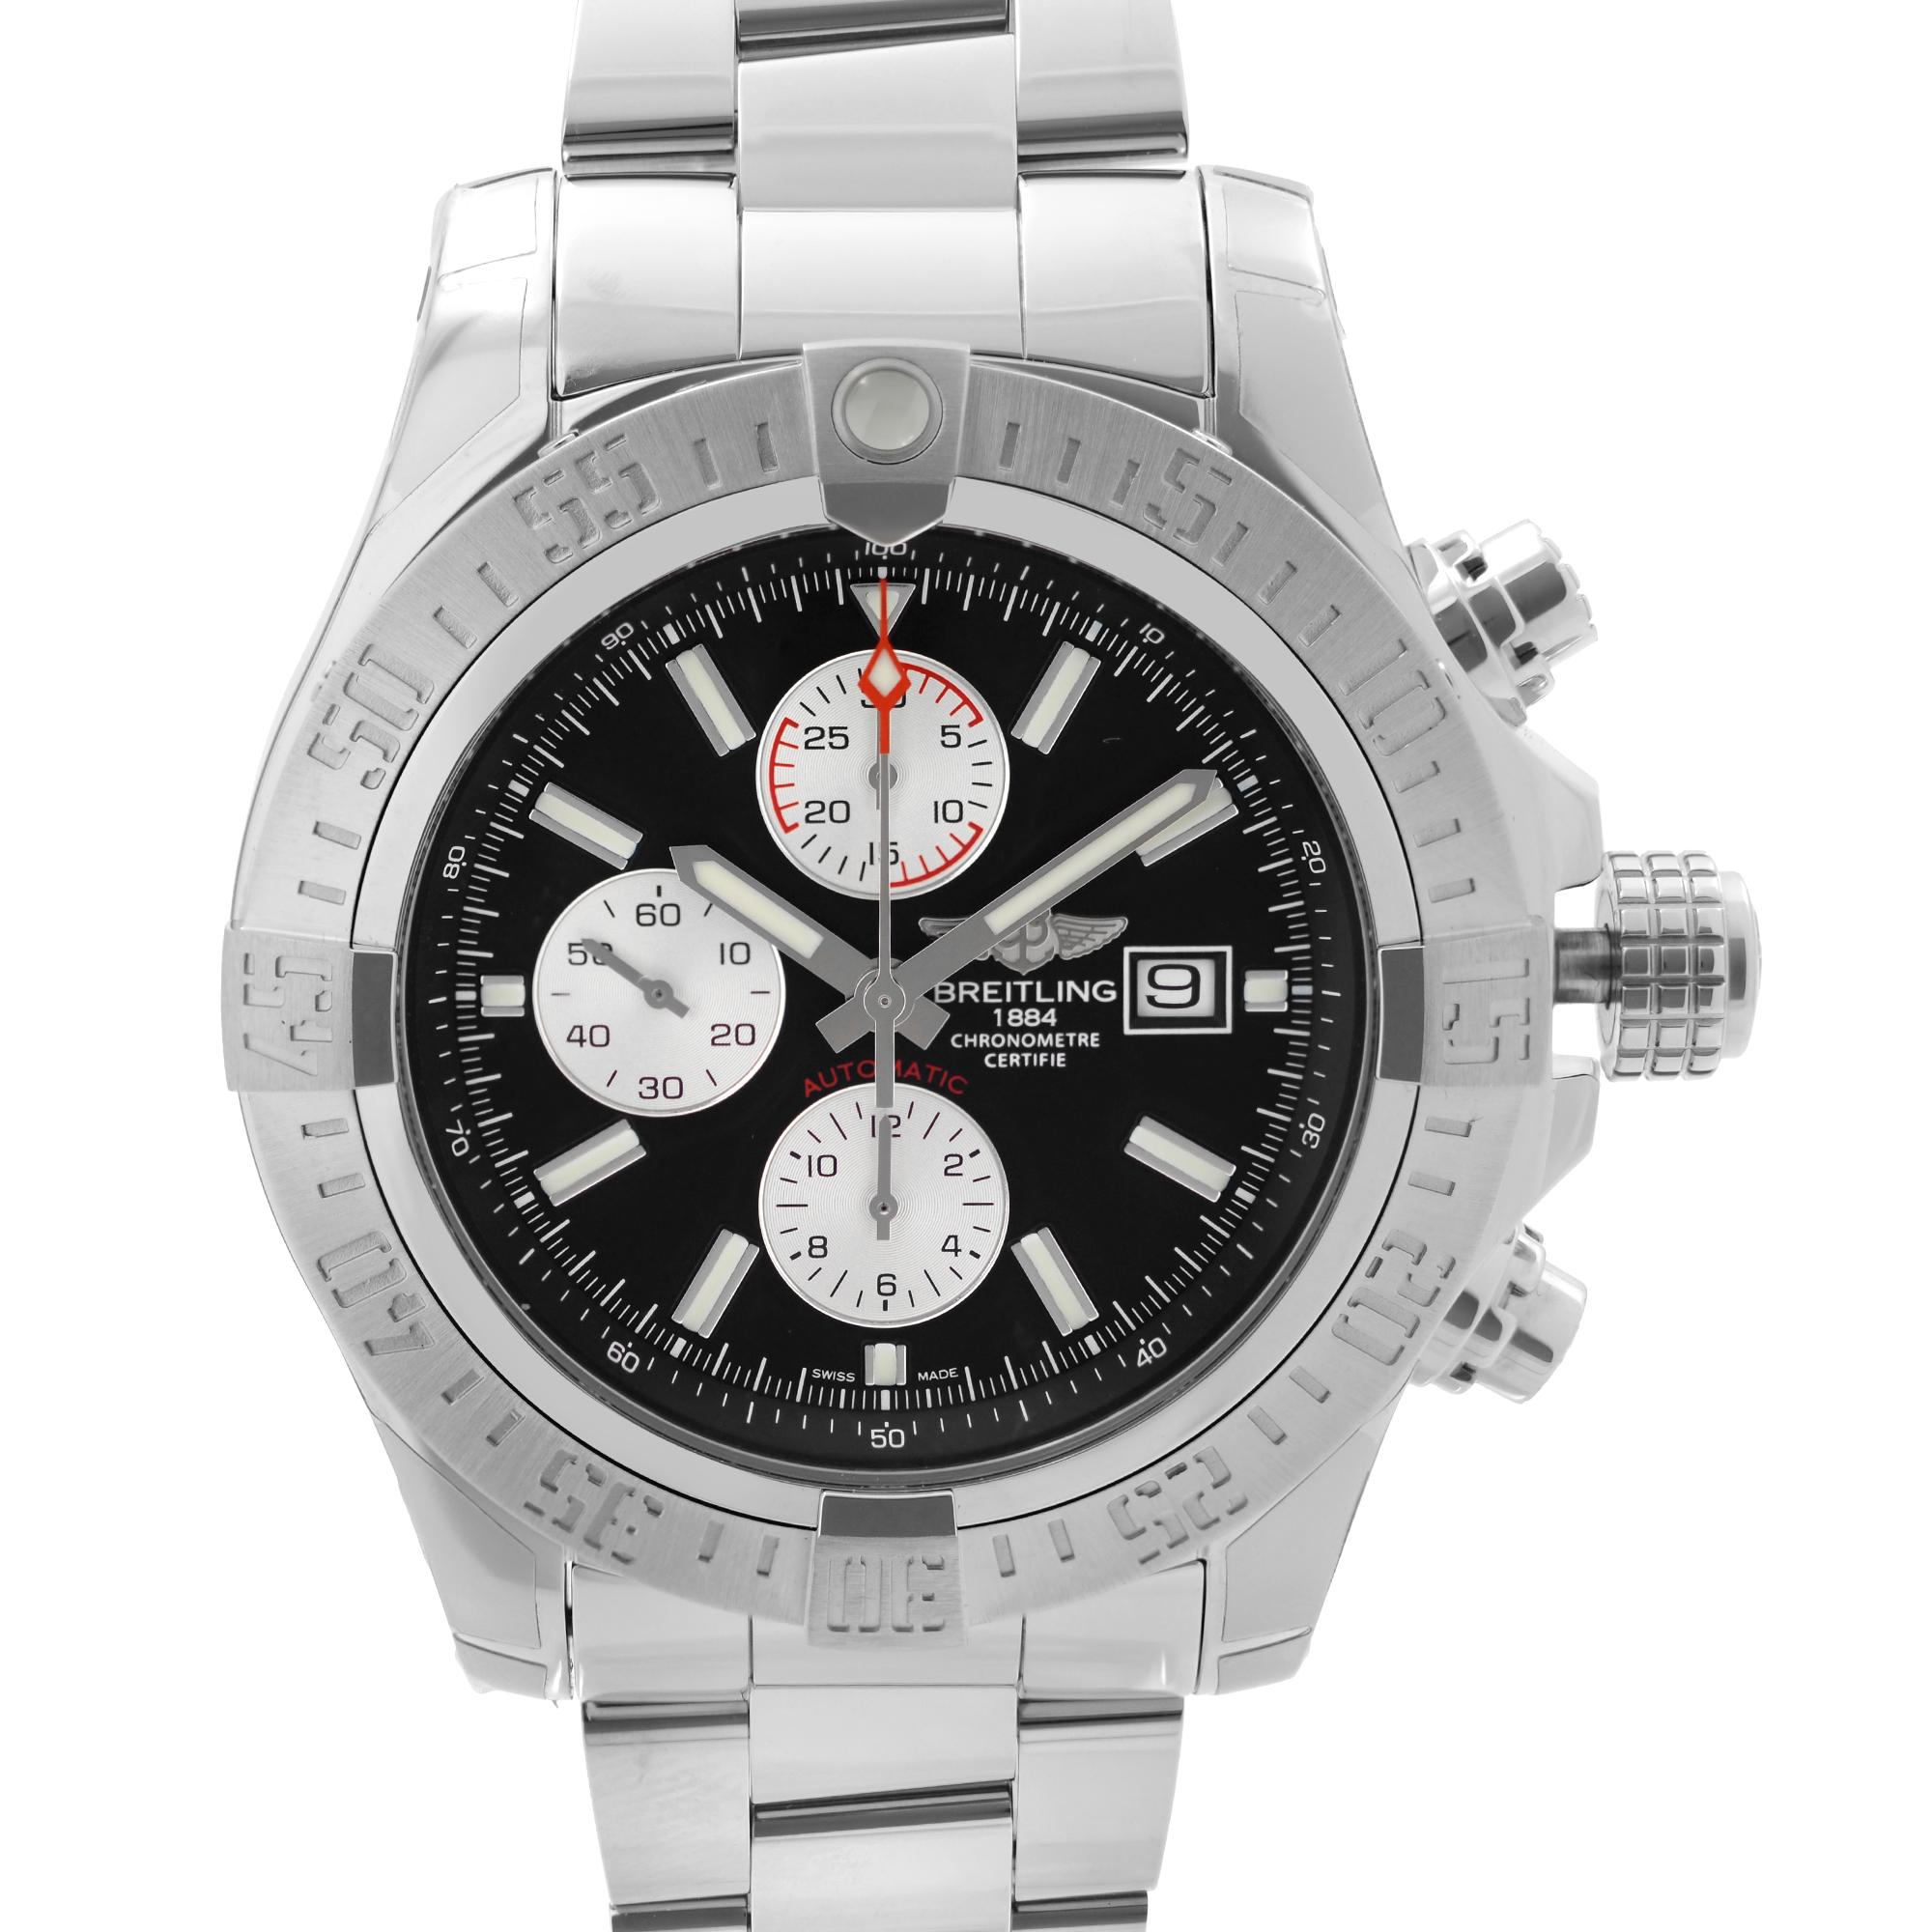 Unworn Breitling Super Avenger II Stainless Steel 49mm Chronograph Black Dial Men's Automatic Watch A13371111B1A1. The Timepiece is powered by an Automatic movement. Features: Polished Stainless Steel Case and Steel Bracelet. Unidirectional Rotating